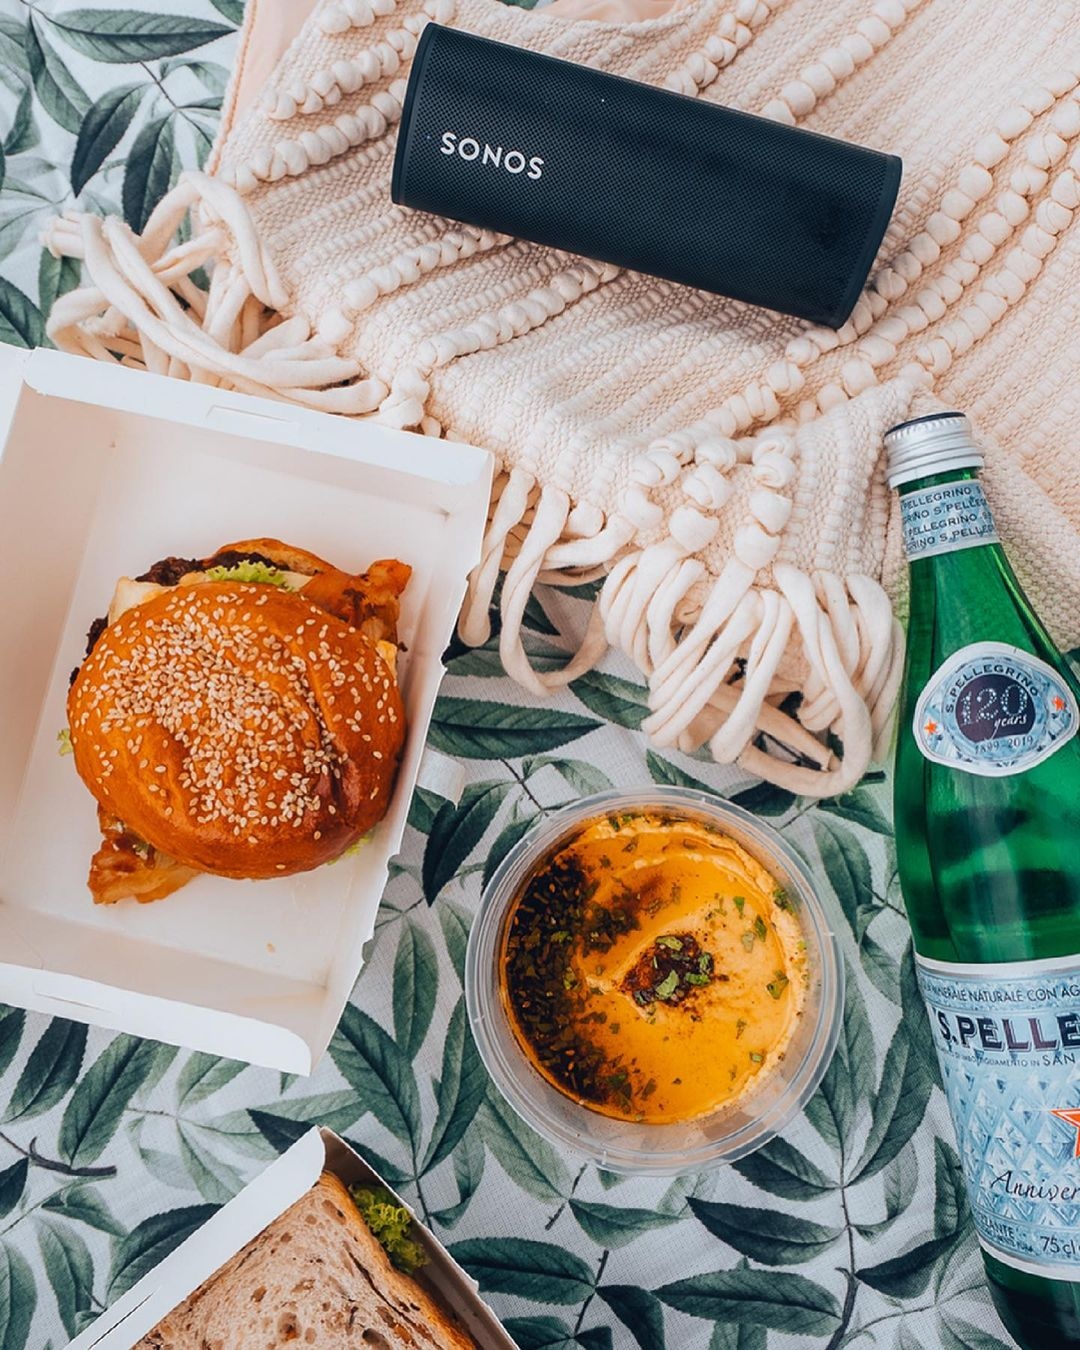 Sonos by TC Acoustic on Twitter: "Weekends are for picnics 🌞 Don't forget to pack extra napkins Roam for an al fresco soundtrack. Best part: Roam is compact and lightweight, leaving